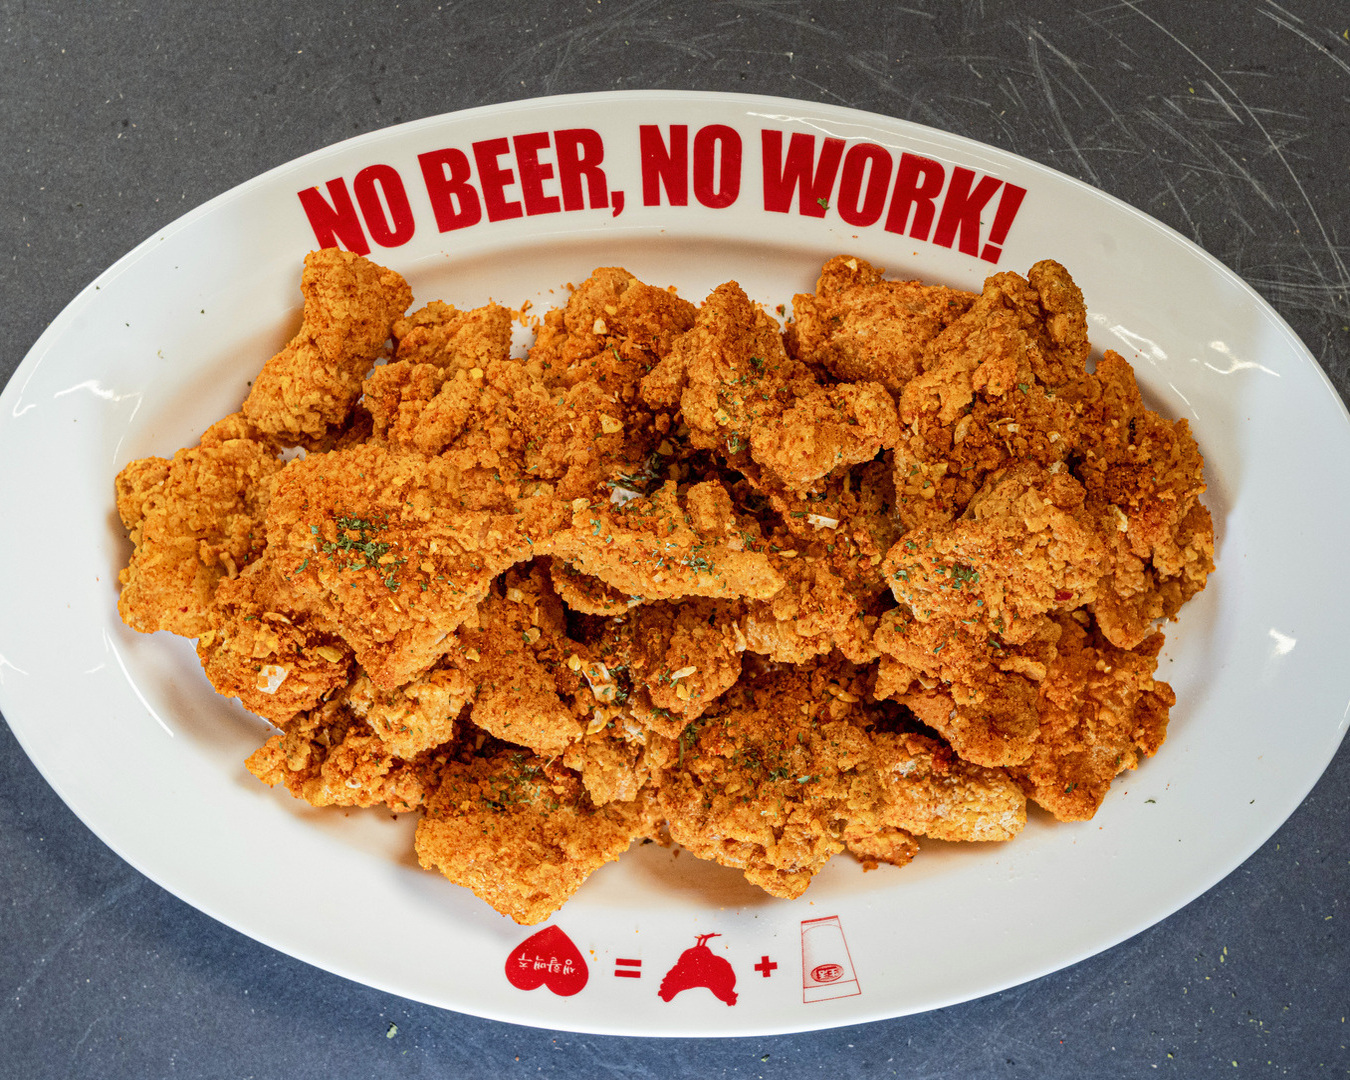 DAILY BEER fried chicken